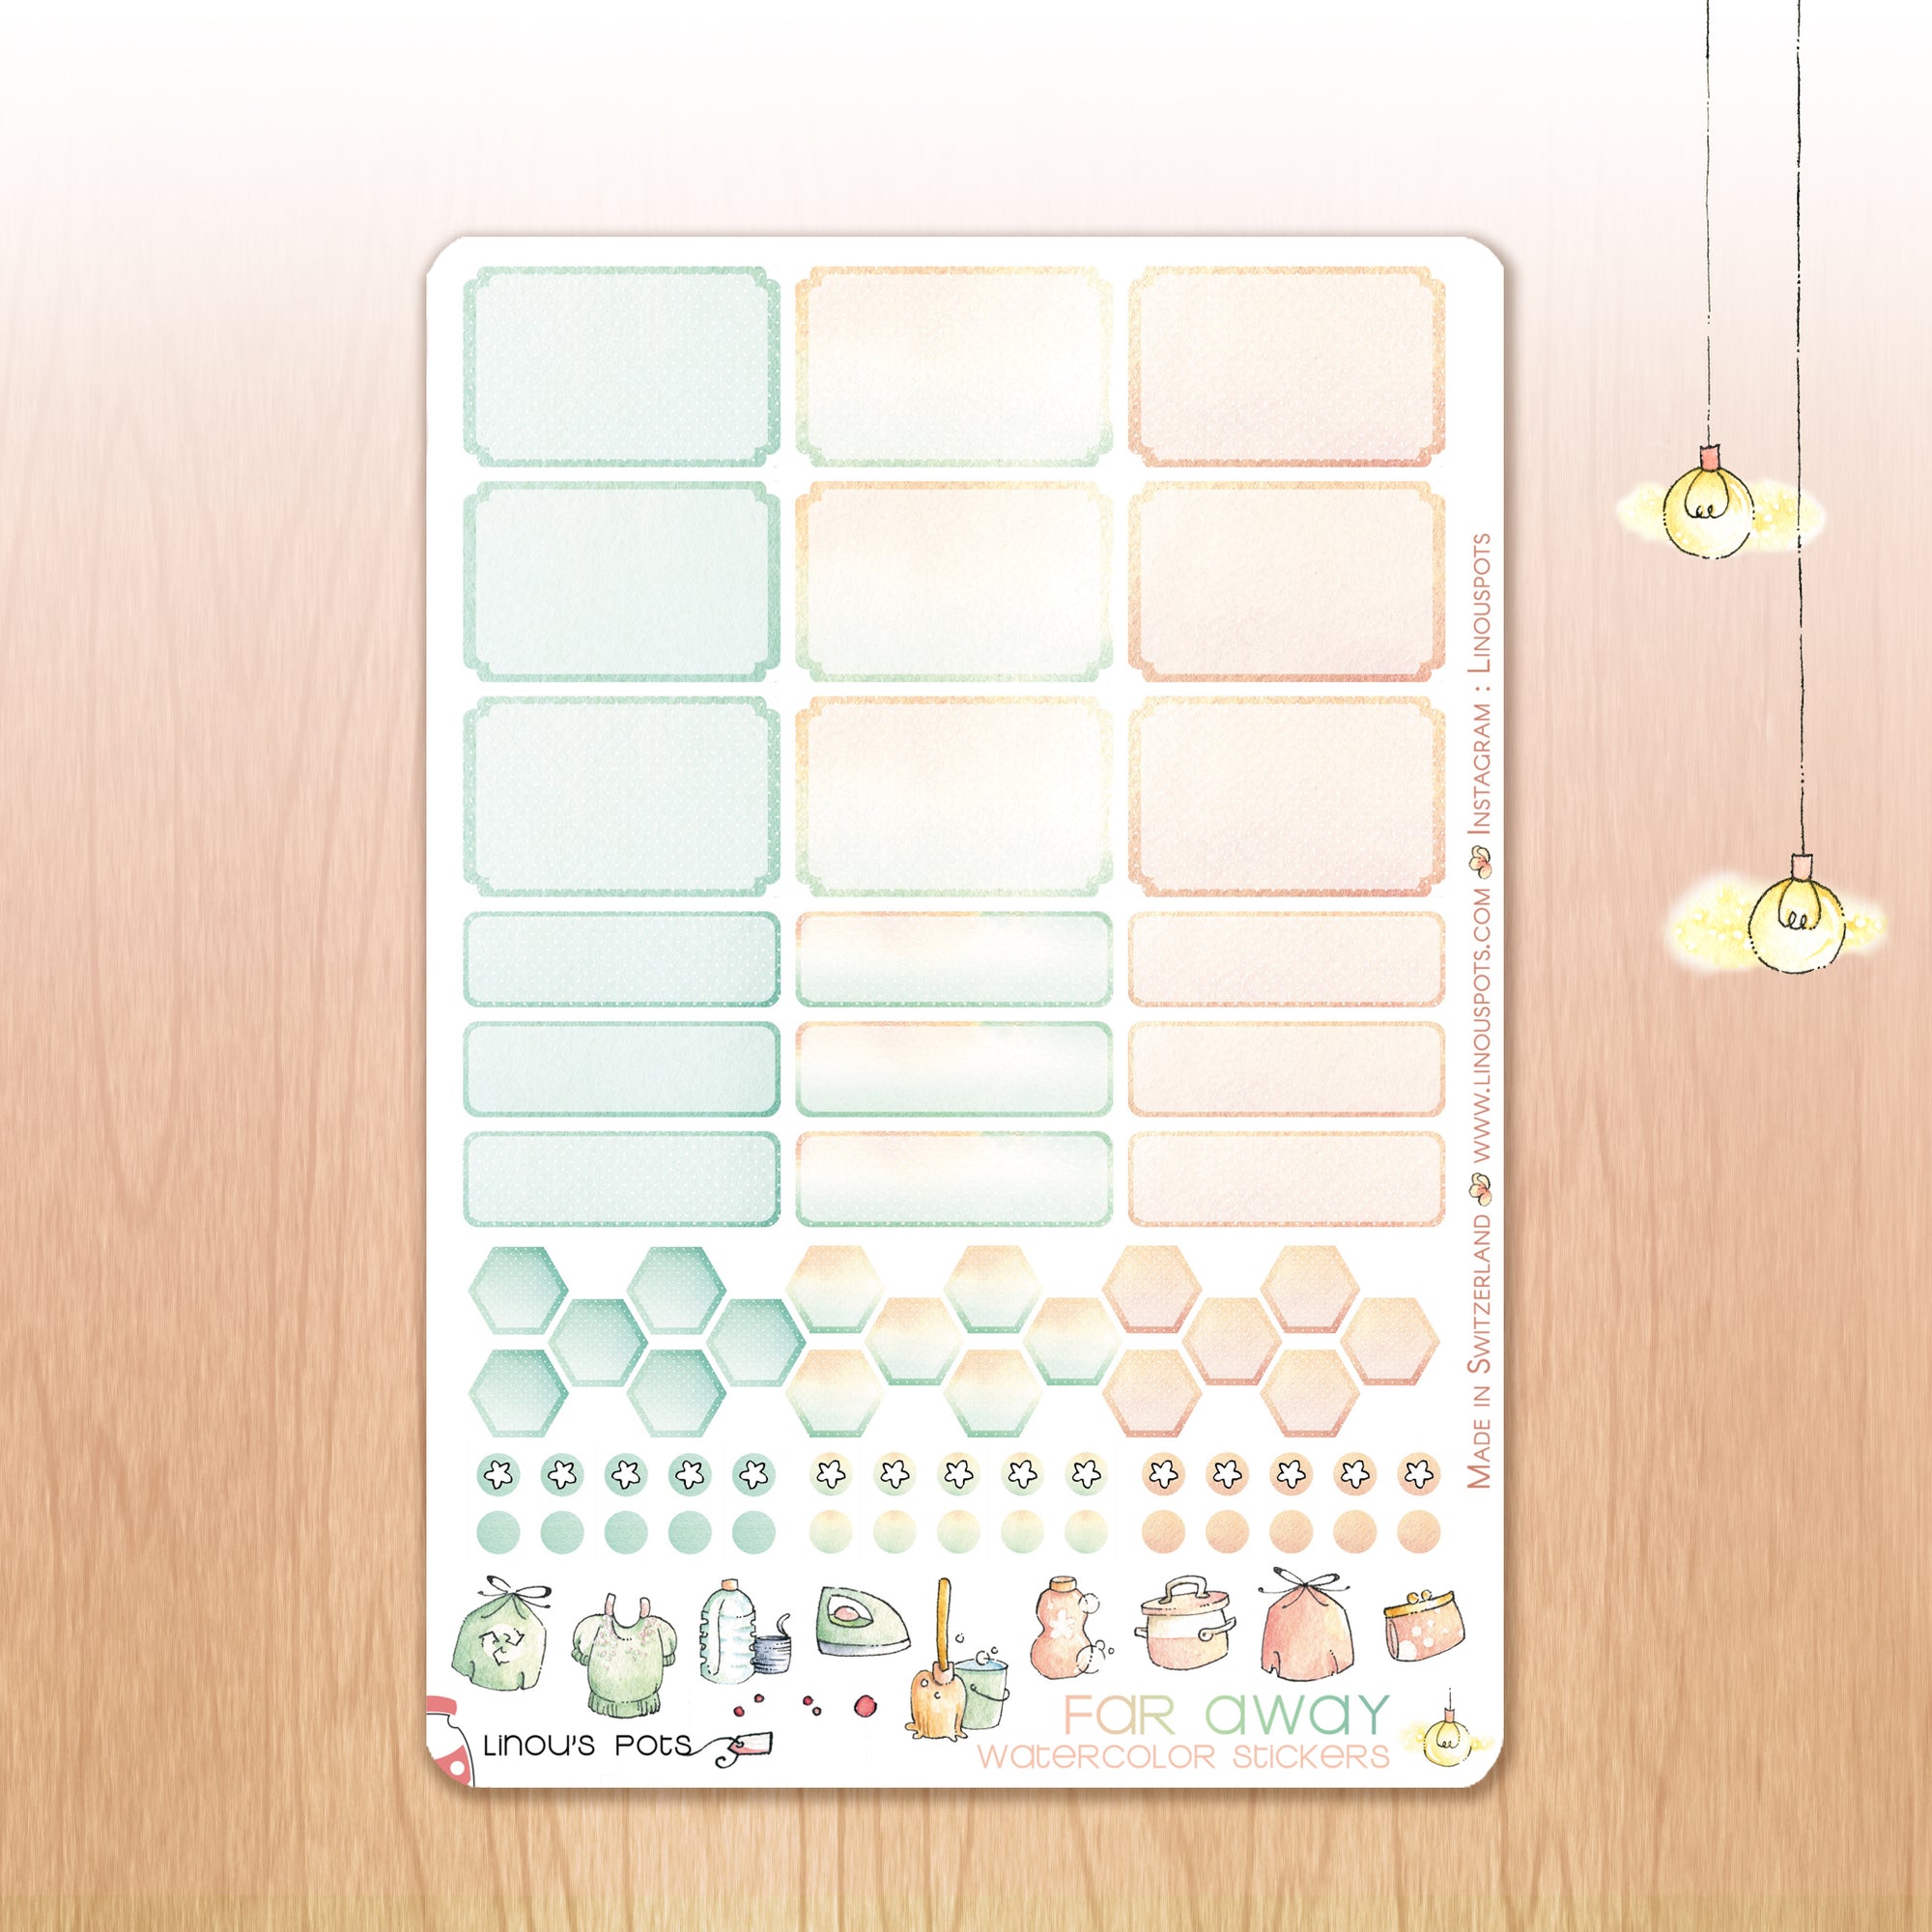 1,5’’ Hemiboxes &amp; Eventboxes from our watercolor planner stickers collection